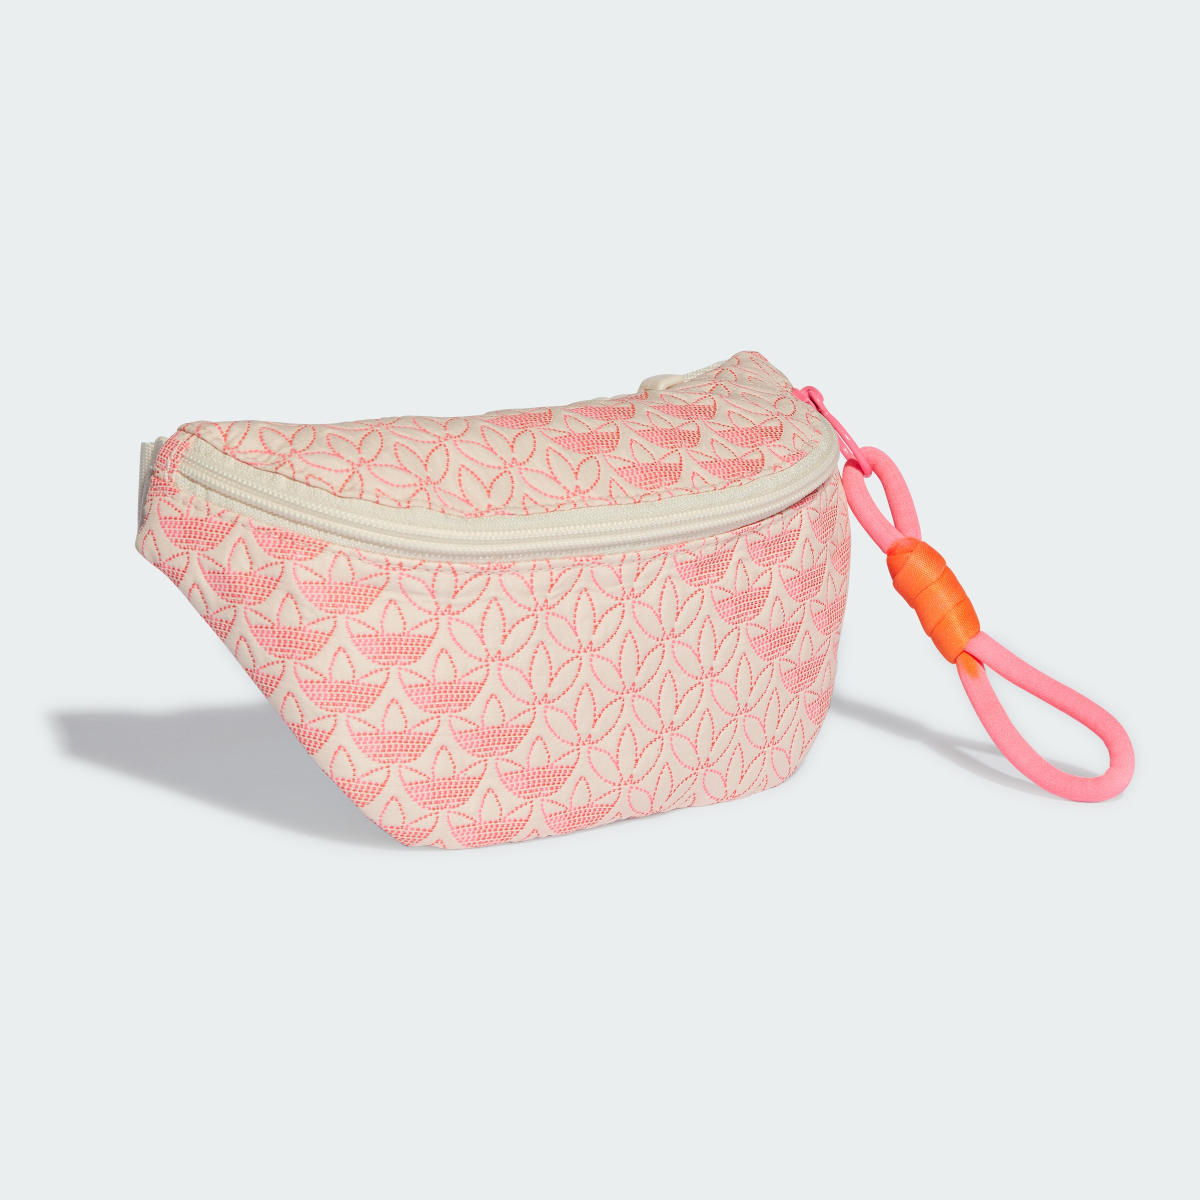 Adidas Quilted Trefoil Waist Bag. 4